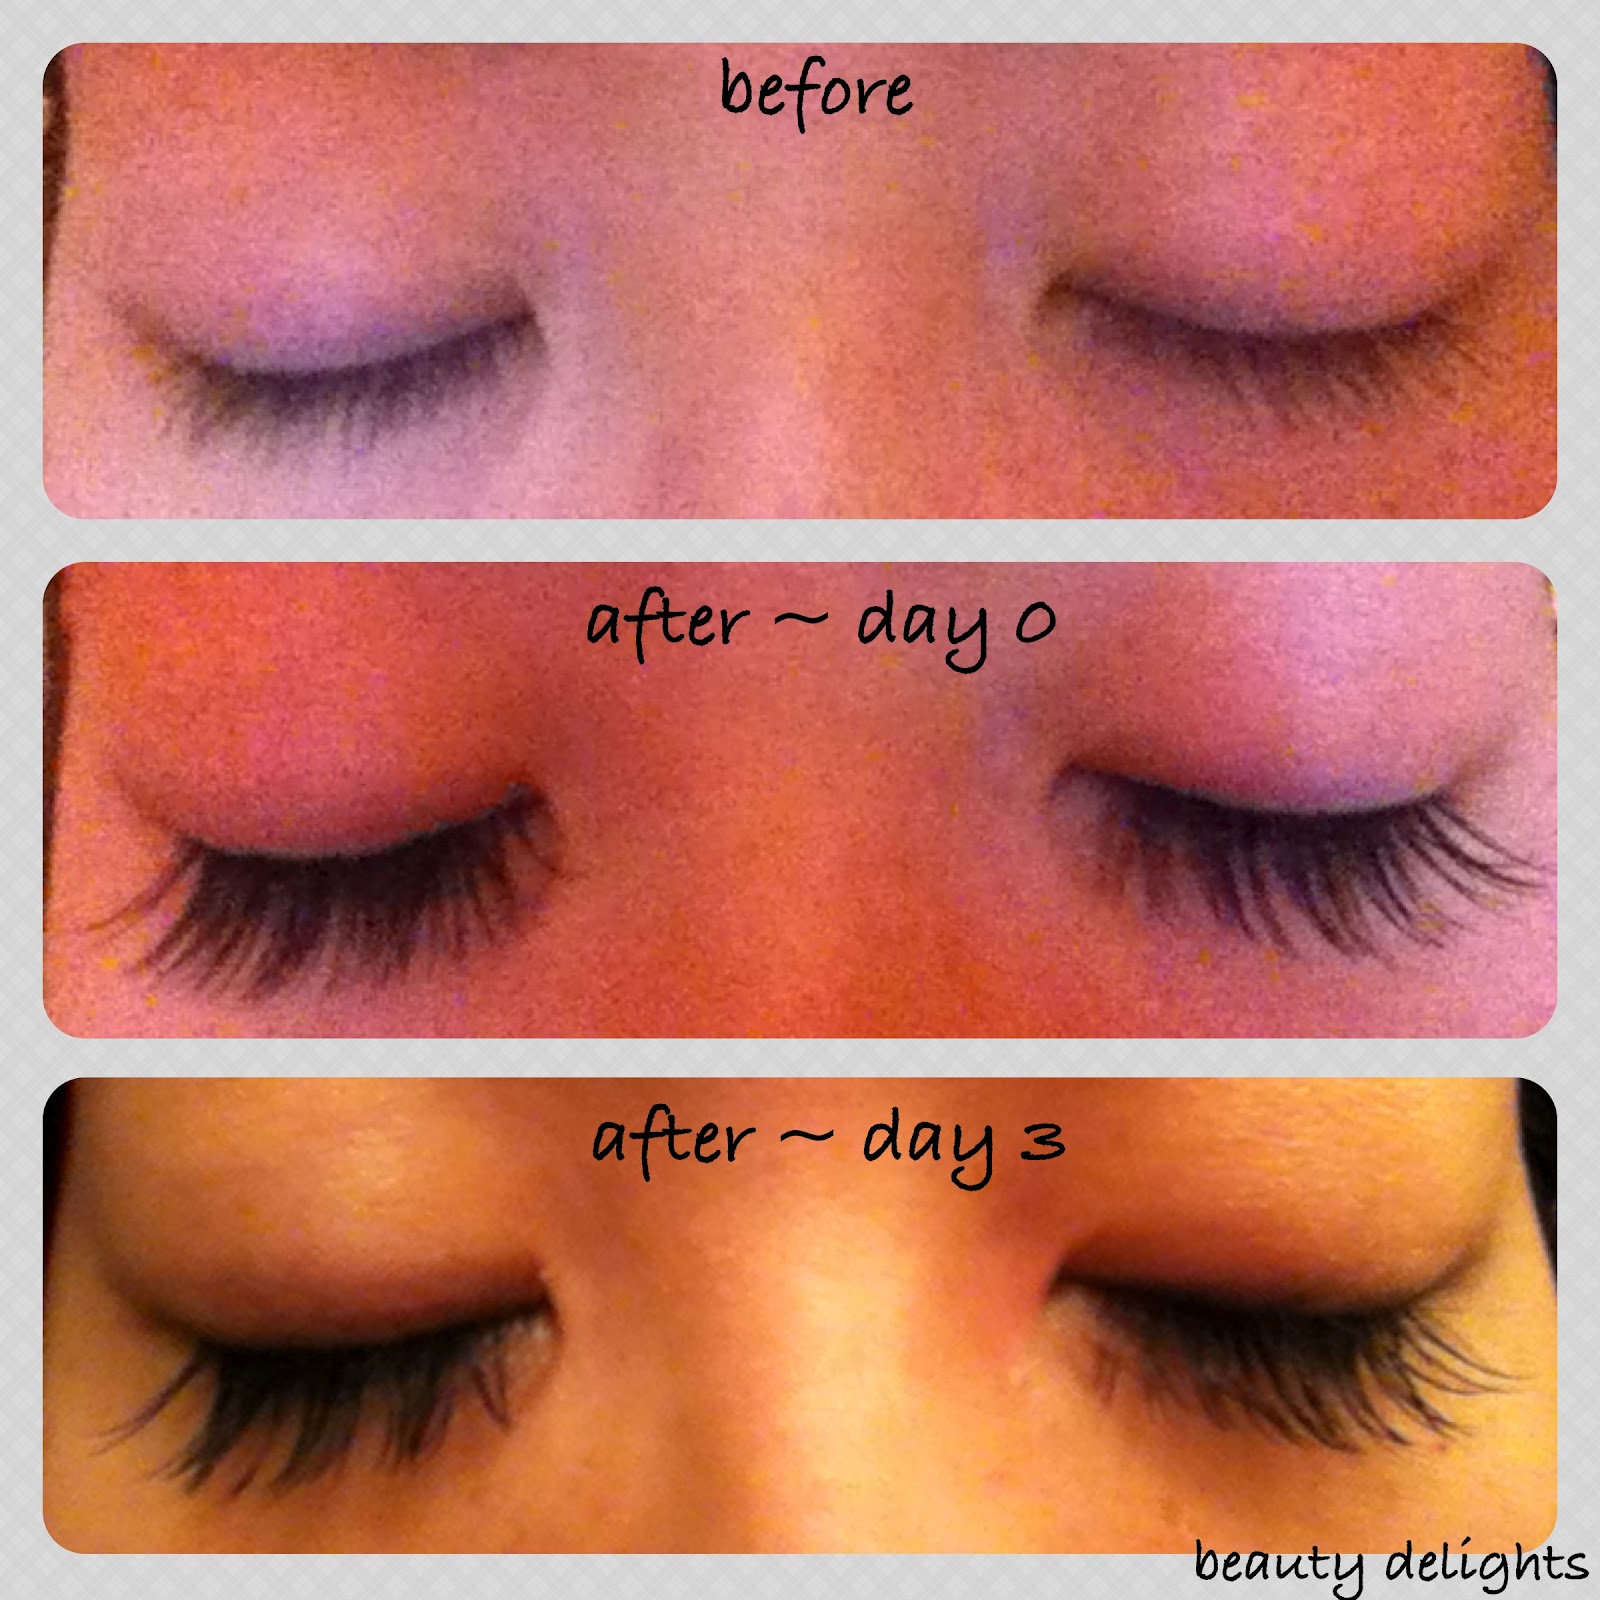 beauty delights: REVIEW: Mink Eyelash Extensions - Week 1